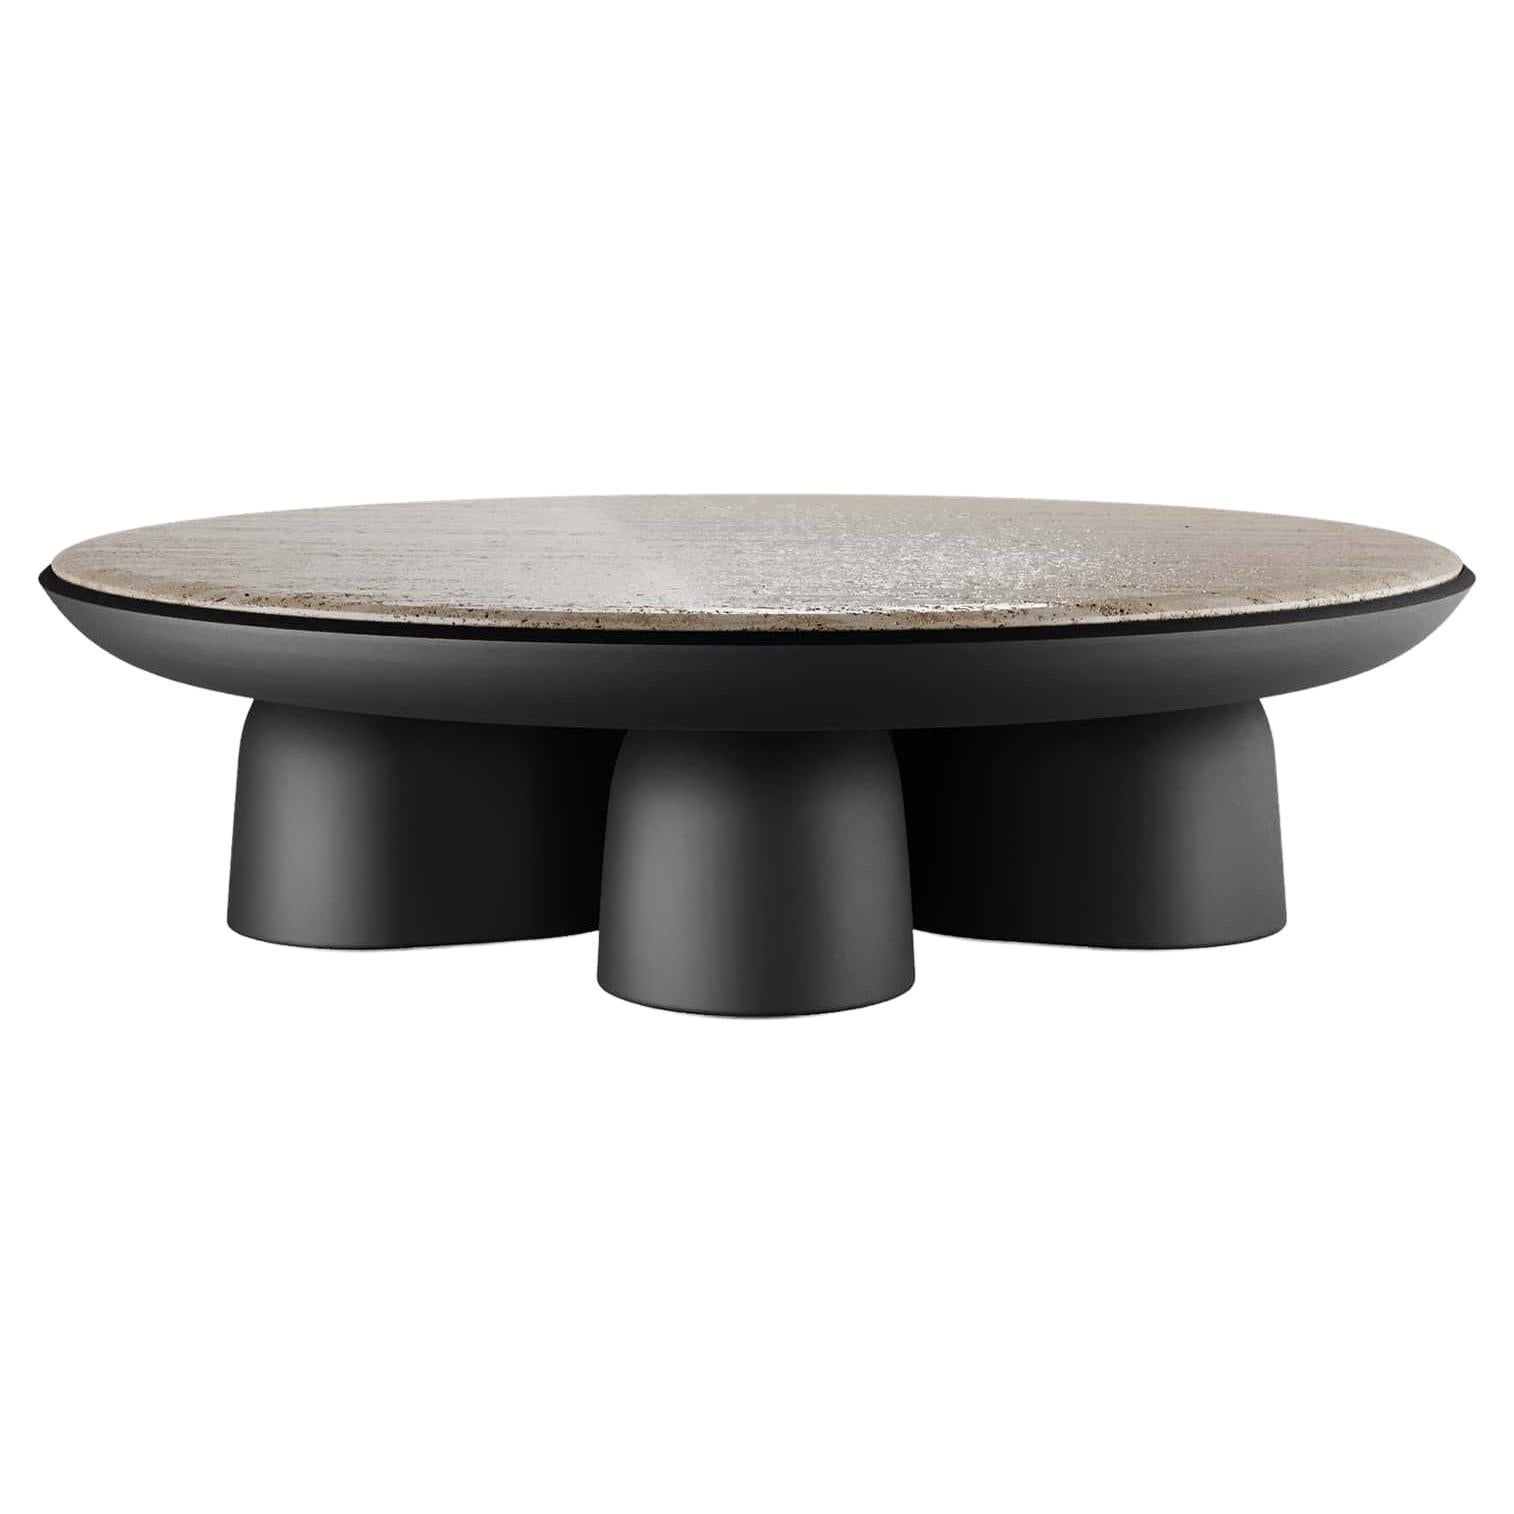 Modern Center Table Black with Tabletop in Travertine Marble and Feet in Wood